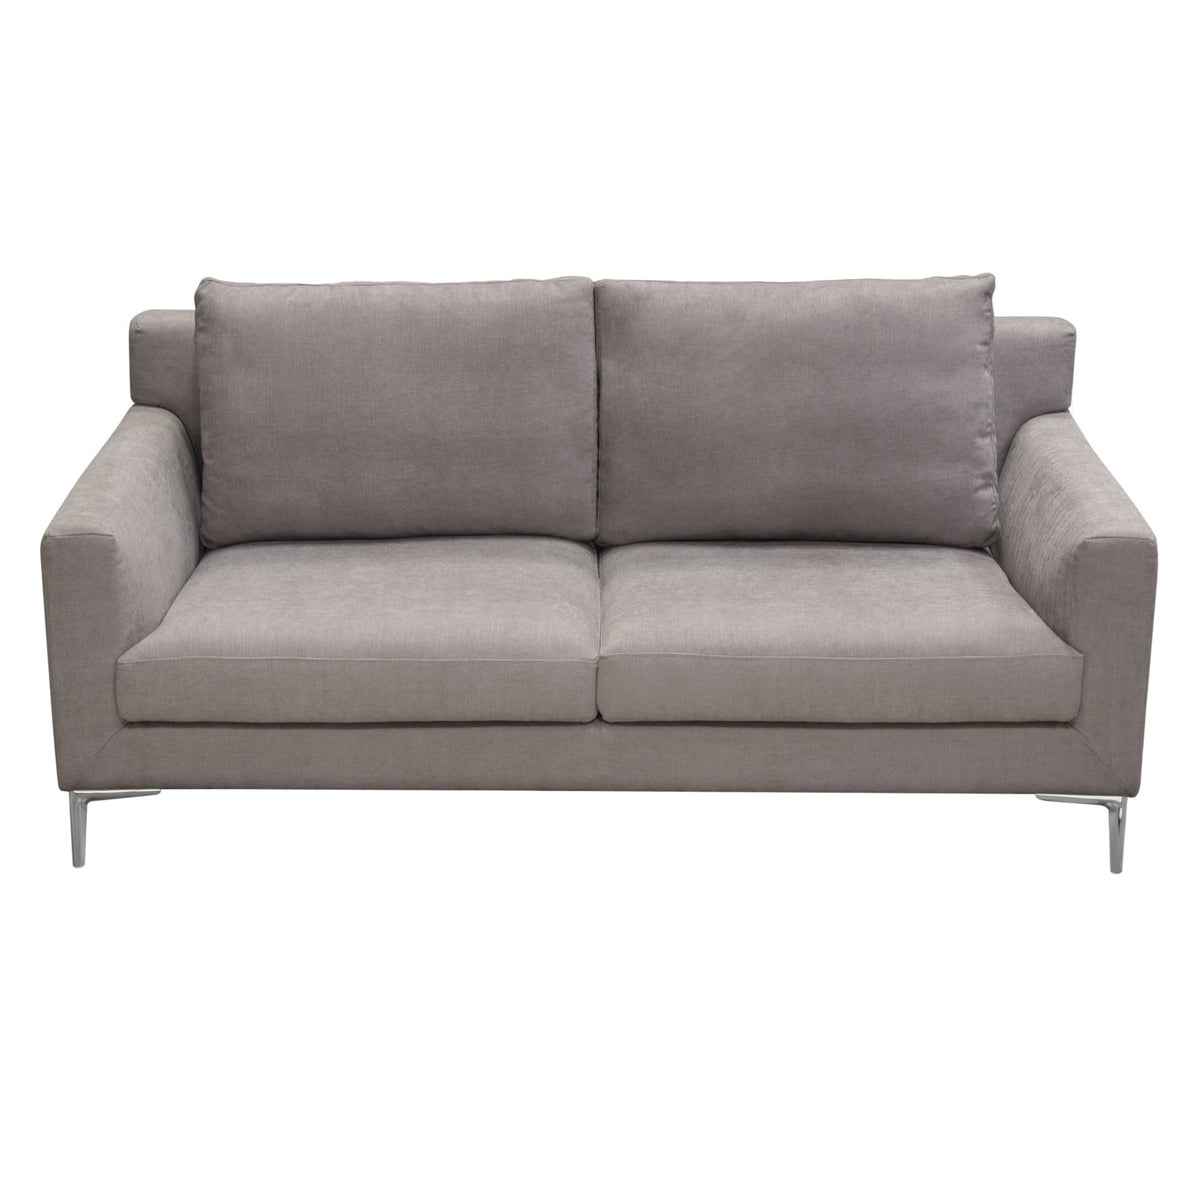 Aretha Grey Fabric with Polished Silver Loveseat - Luxury Living Collection